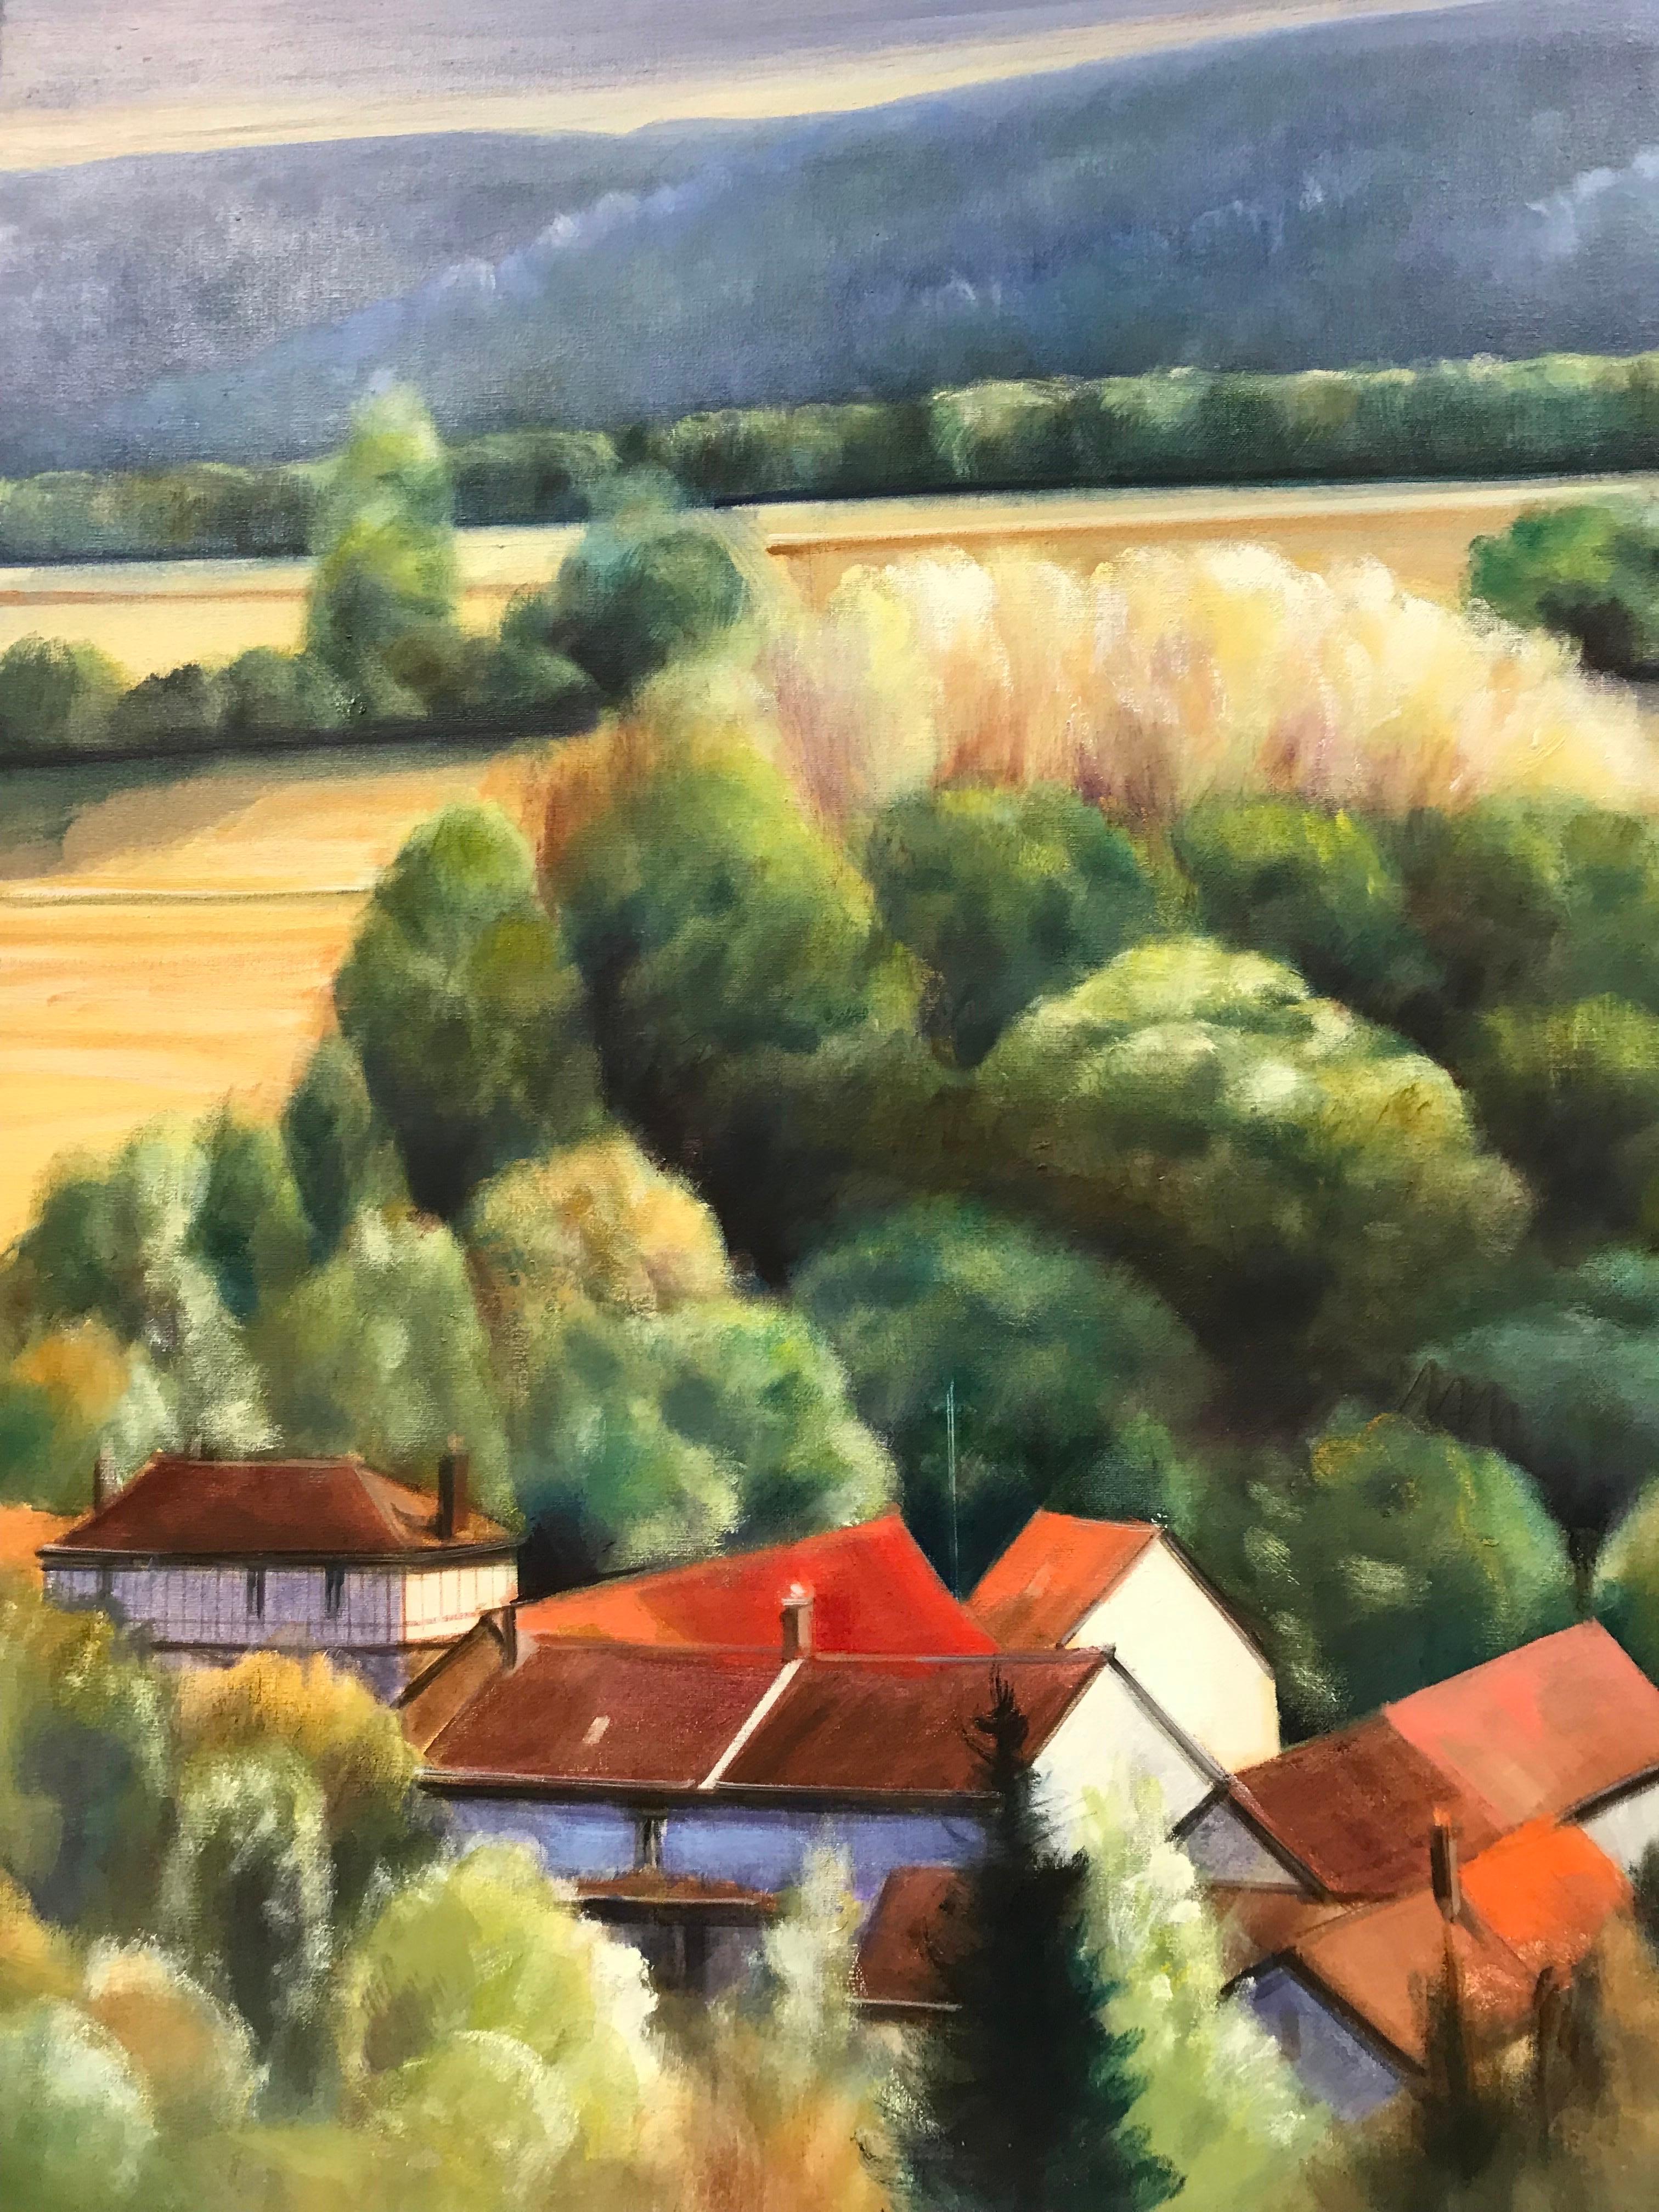 Artist/ School: French School, indistinctly signed, dated 2006

Title: titled verso, landscape showing the valley at Giverny

Medium: oil painting on canvas, unframed, signed

canvas: 23.5 x 29 inches

Provenance: private collection,